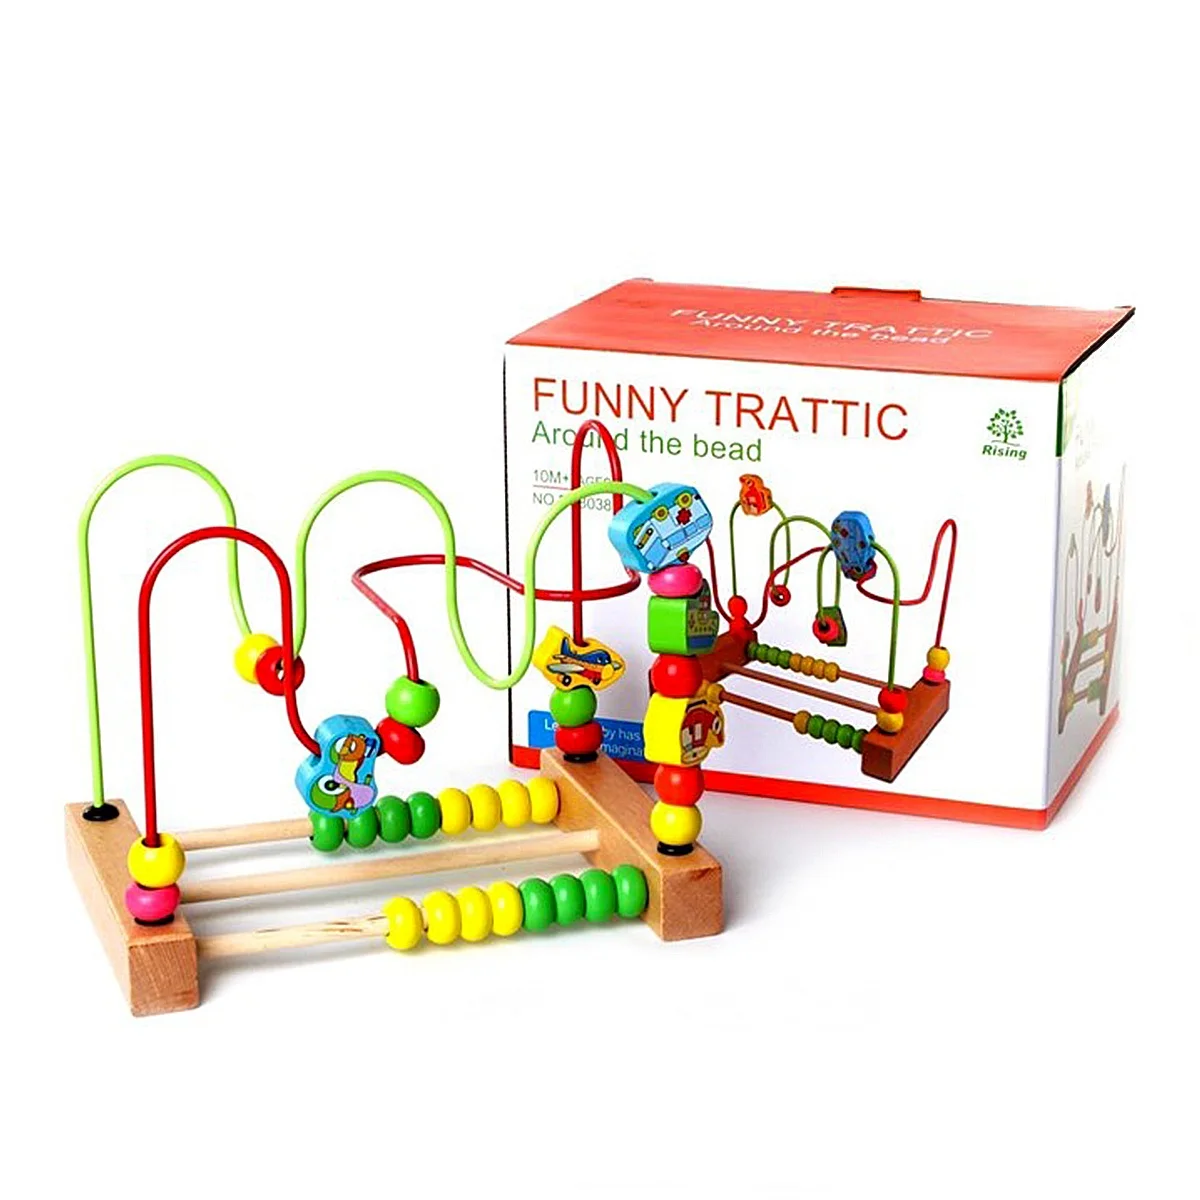 Educational wooden coordination game